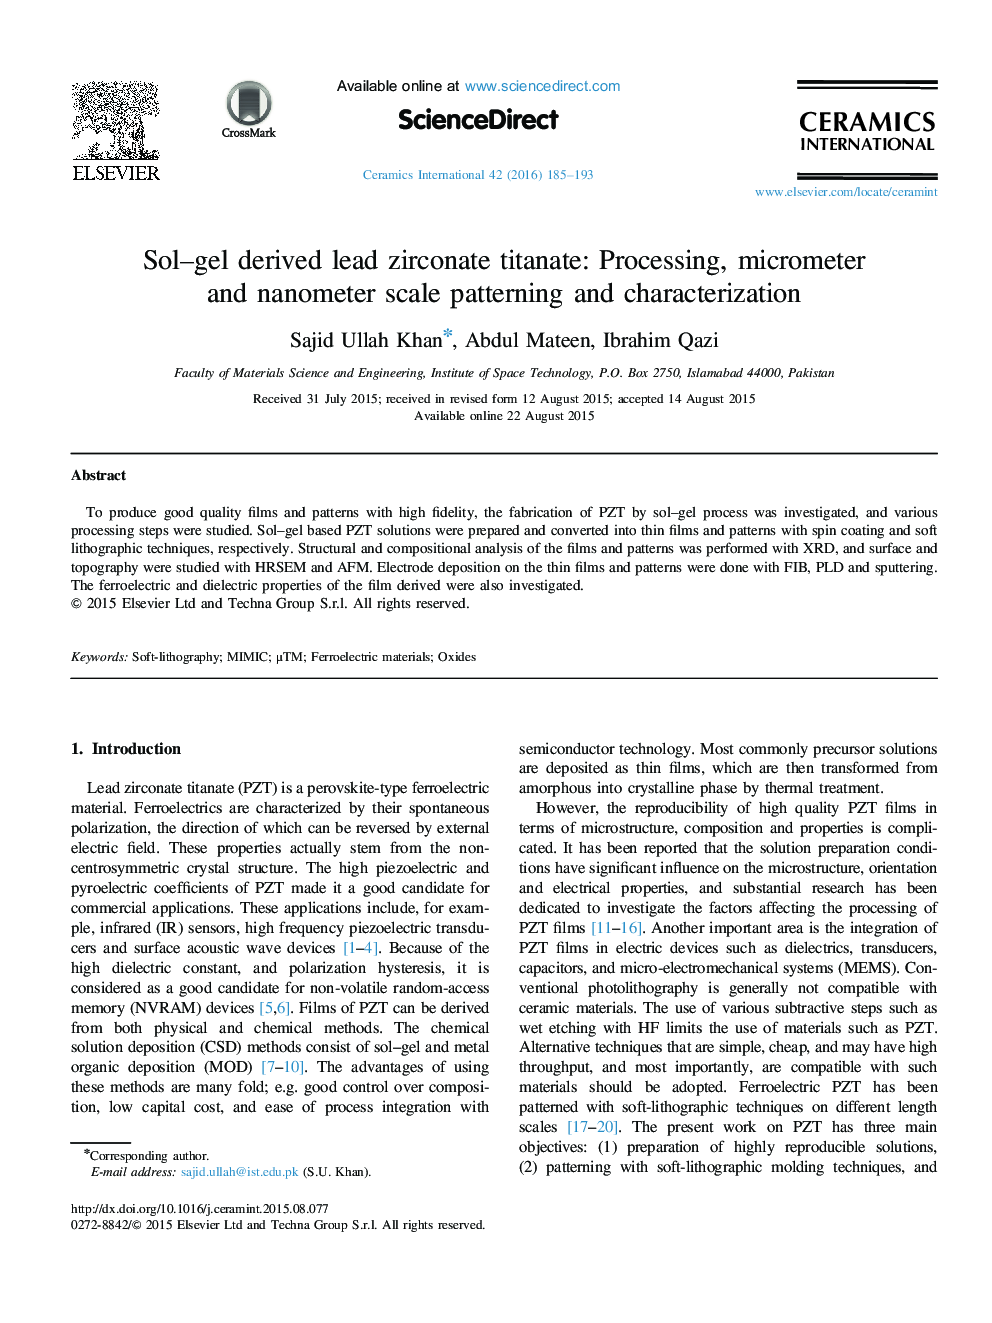 Sol-gel derived lead zirconate titanate: Processing, micrometer and nanometer scale patterning and characterization